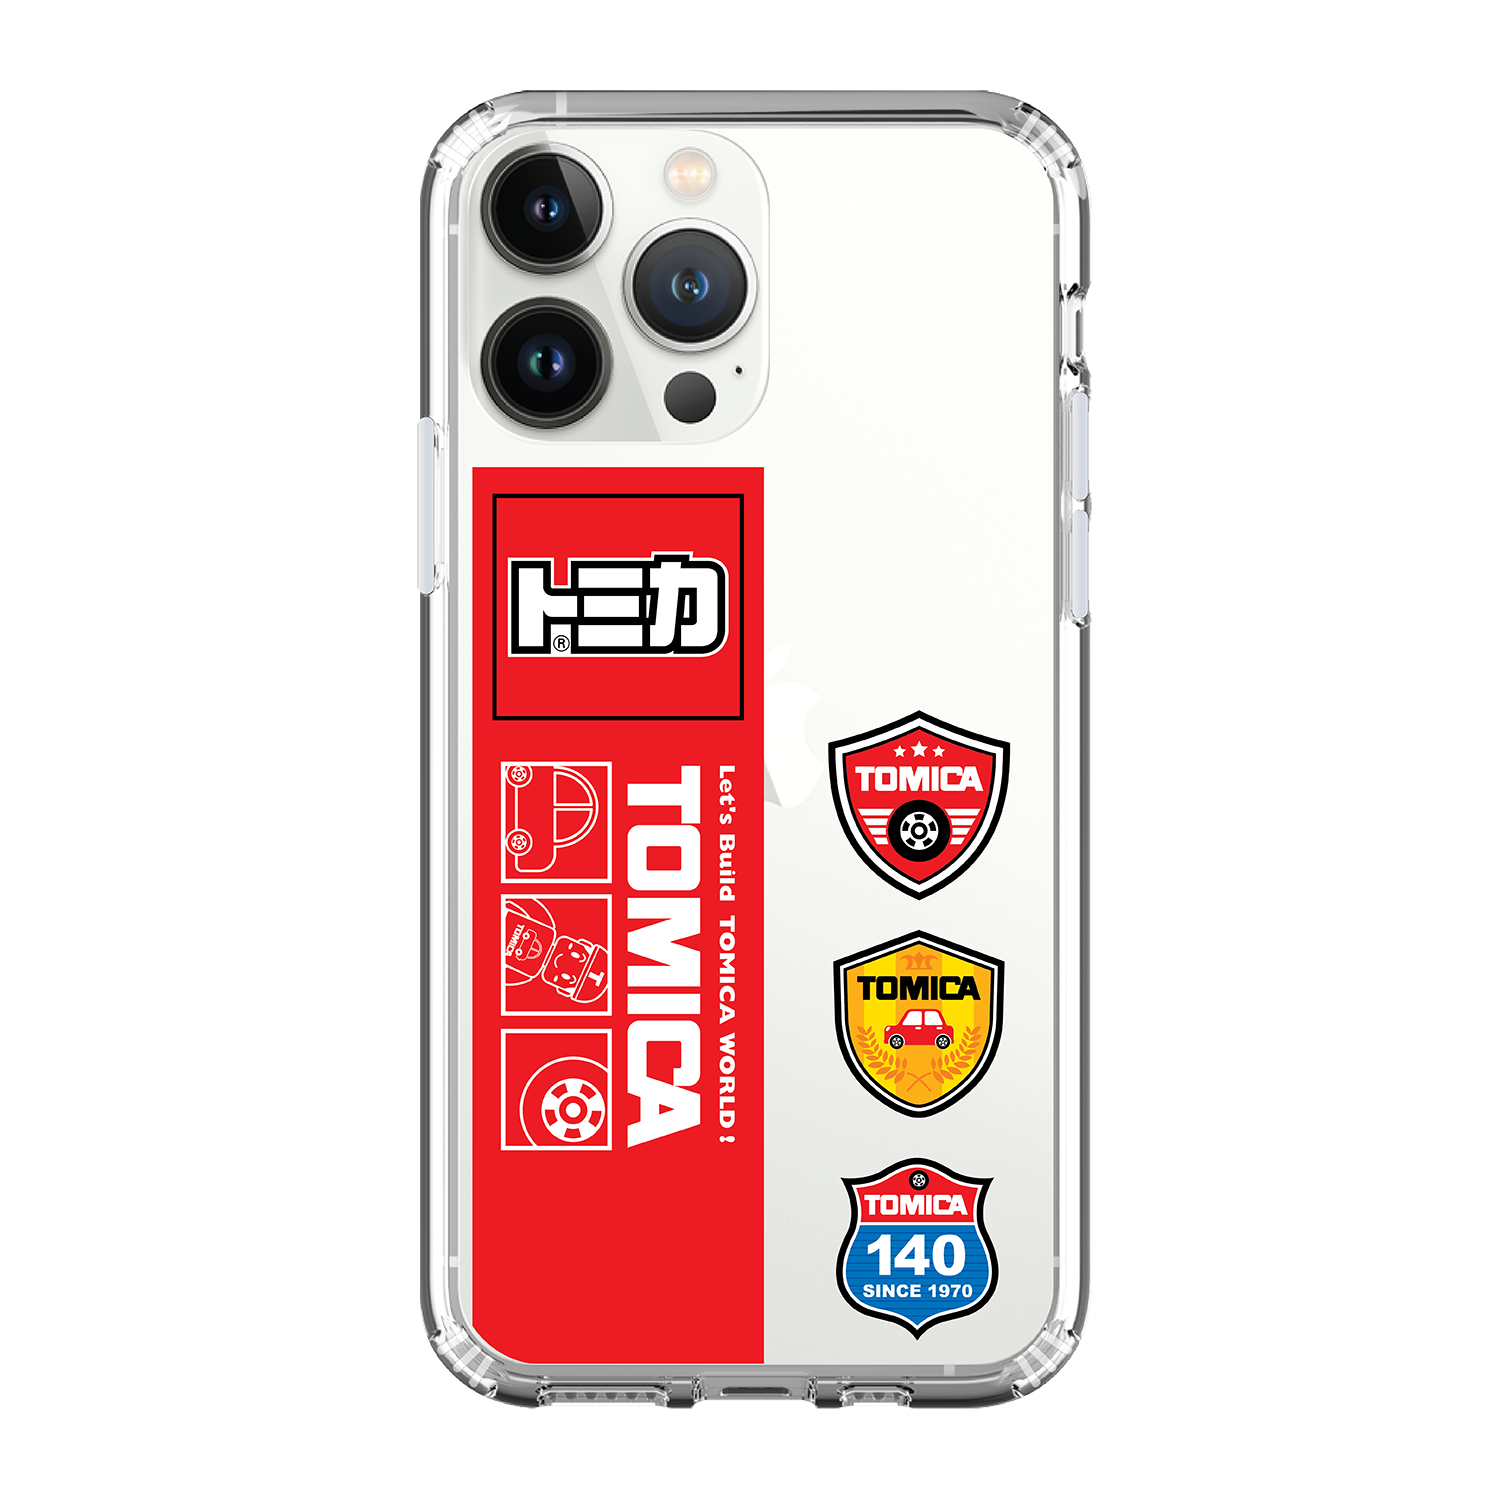 TOMICA Clear Case / iPhone Case / Android Case / Samsung Case 正版授權 專利設計 全包邊氣囊防撞手機殼 (TOMICA04)